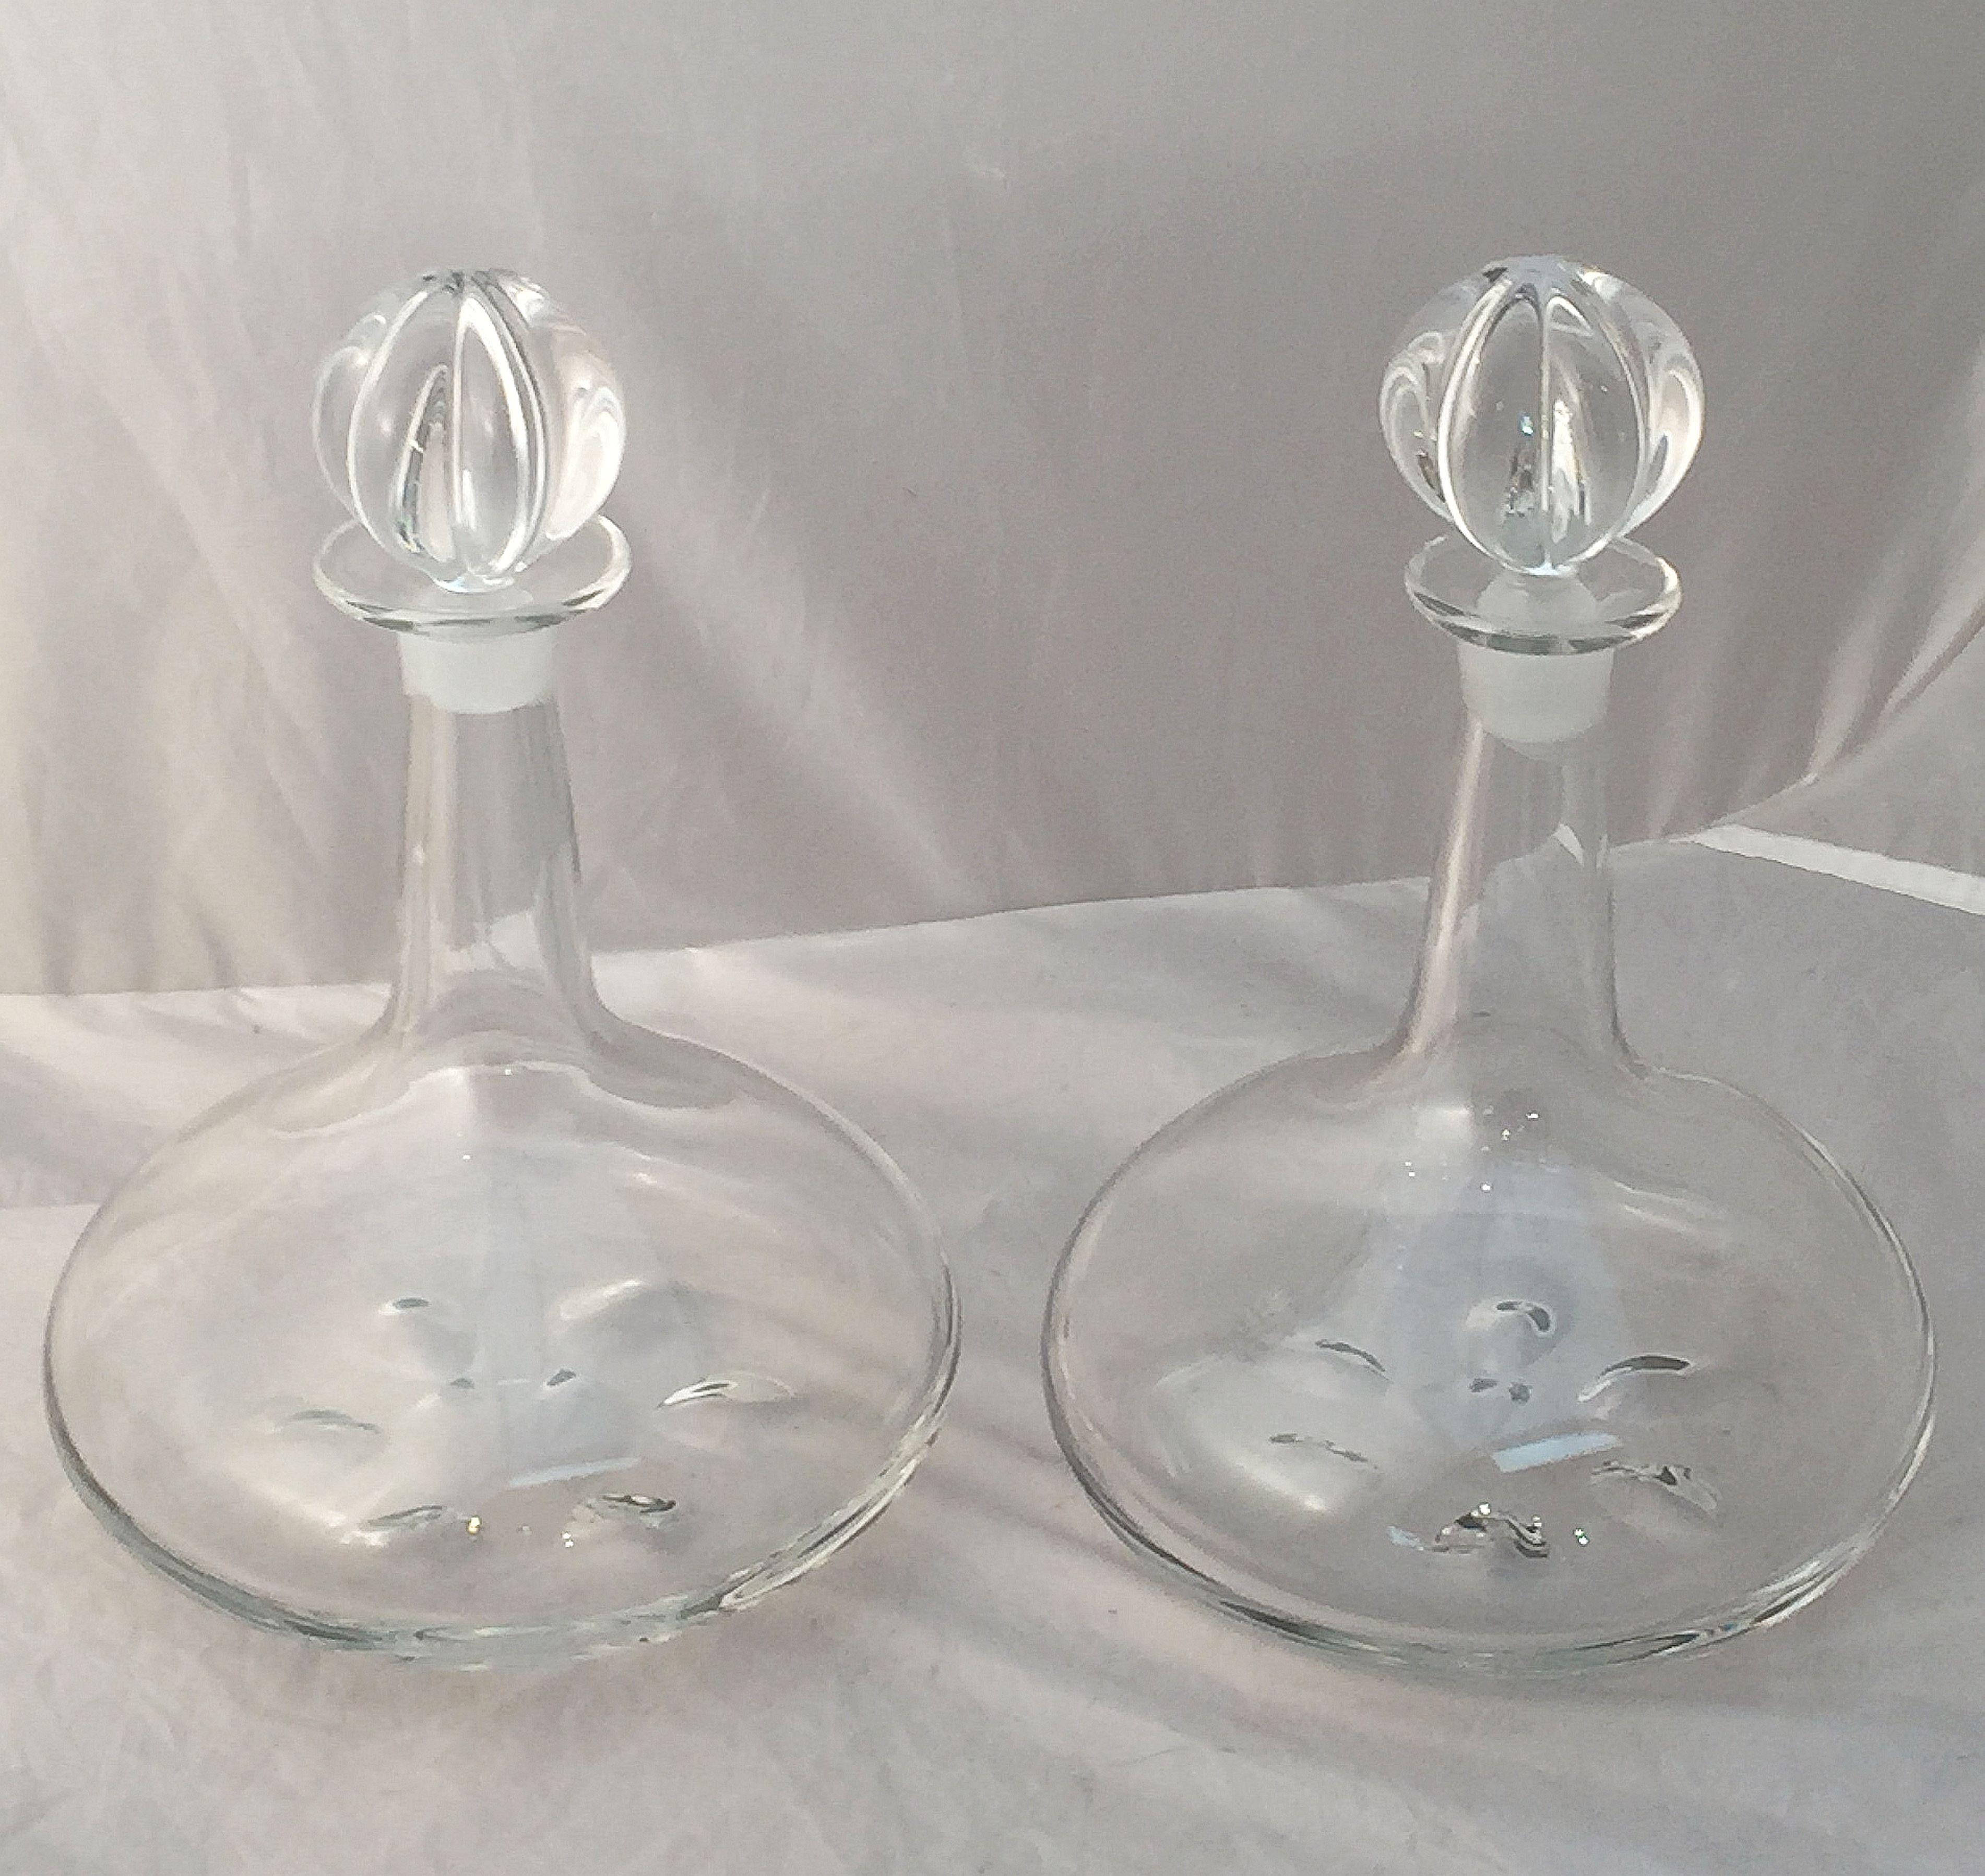 orrefors decanters